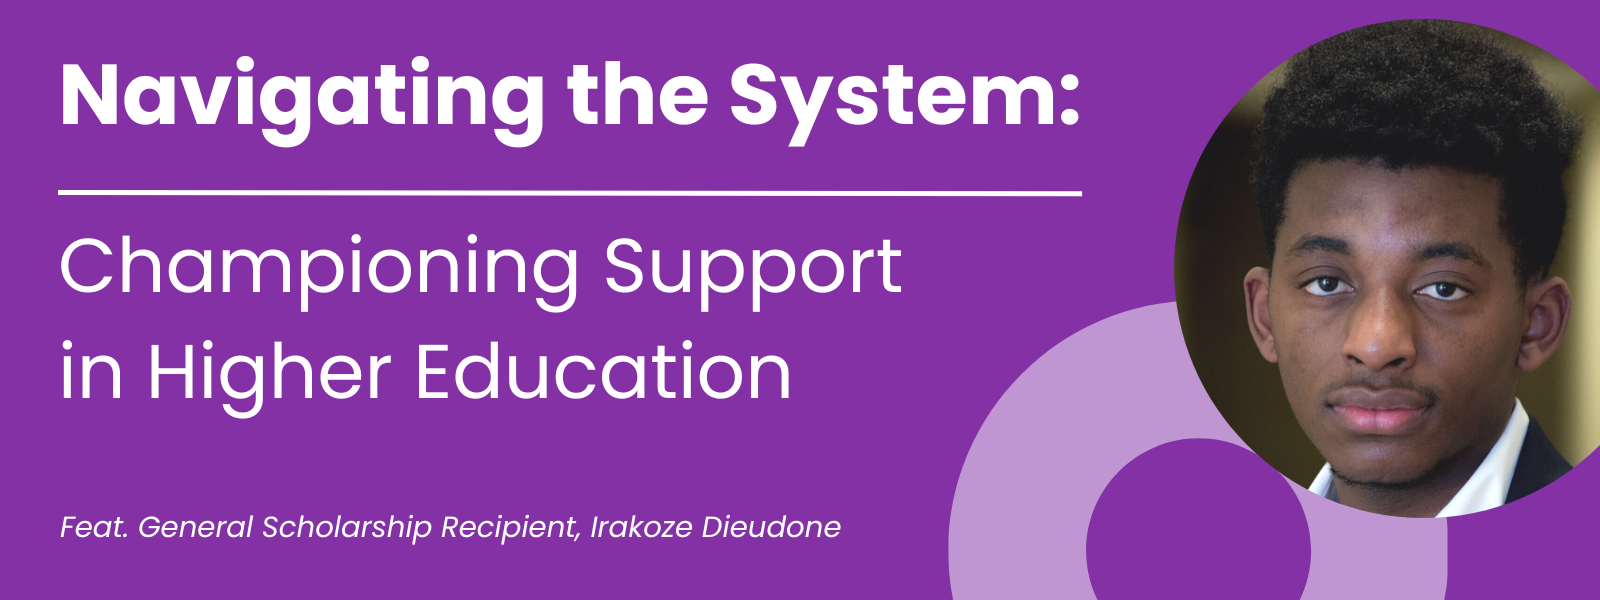 February 2023 Blog: Navigating the System: Championing Support in Higher Education featuring General Scholarship Recipient Irakoze Dieudone